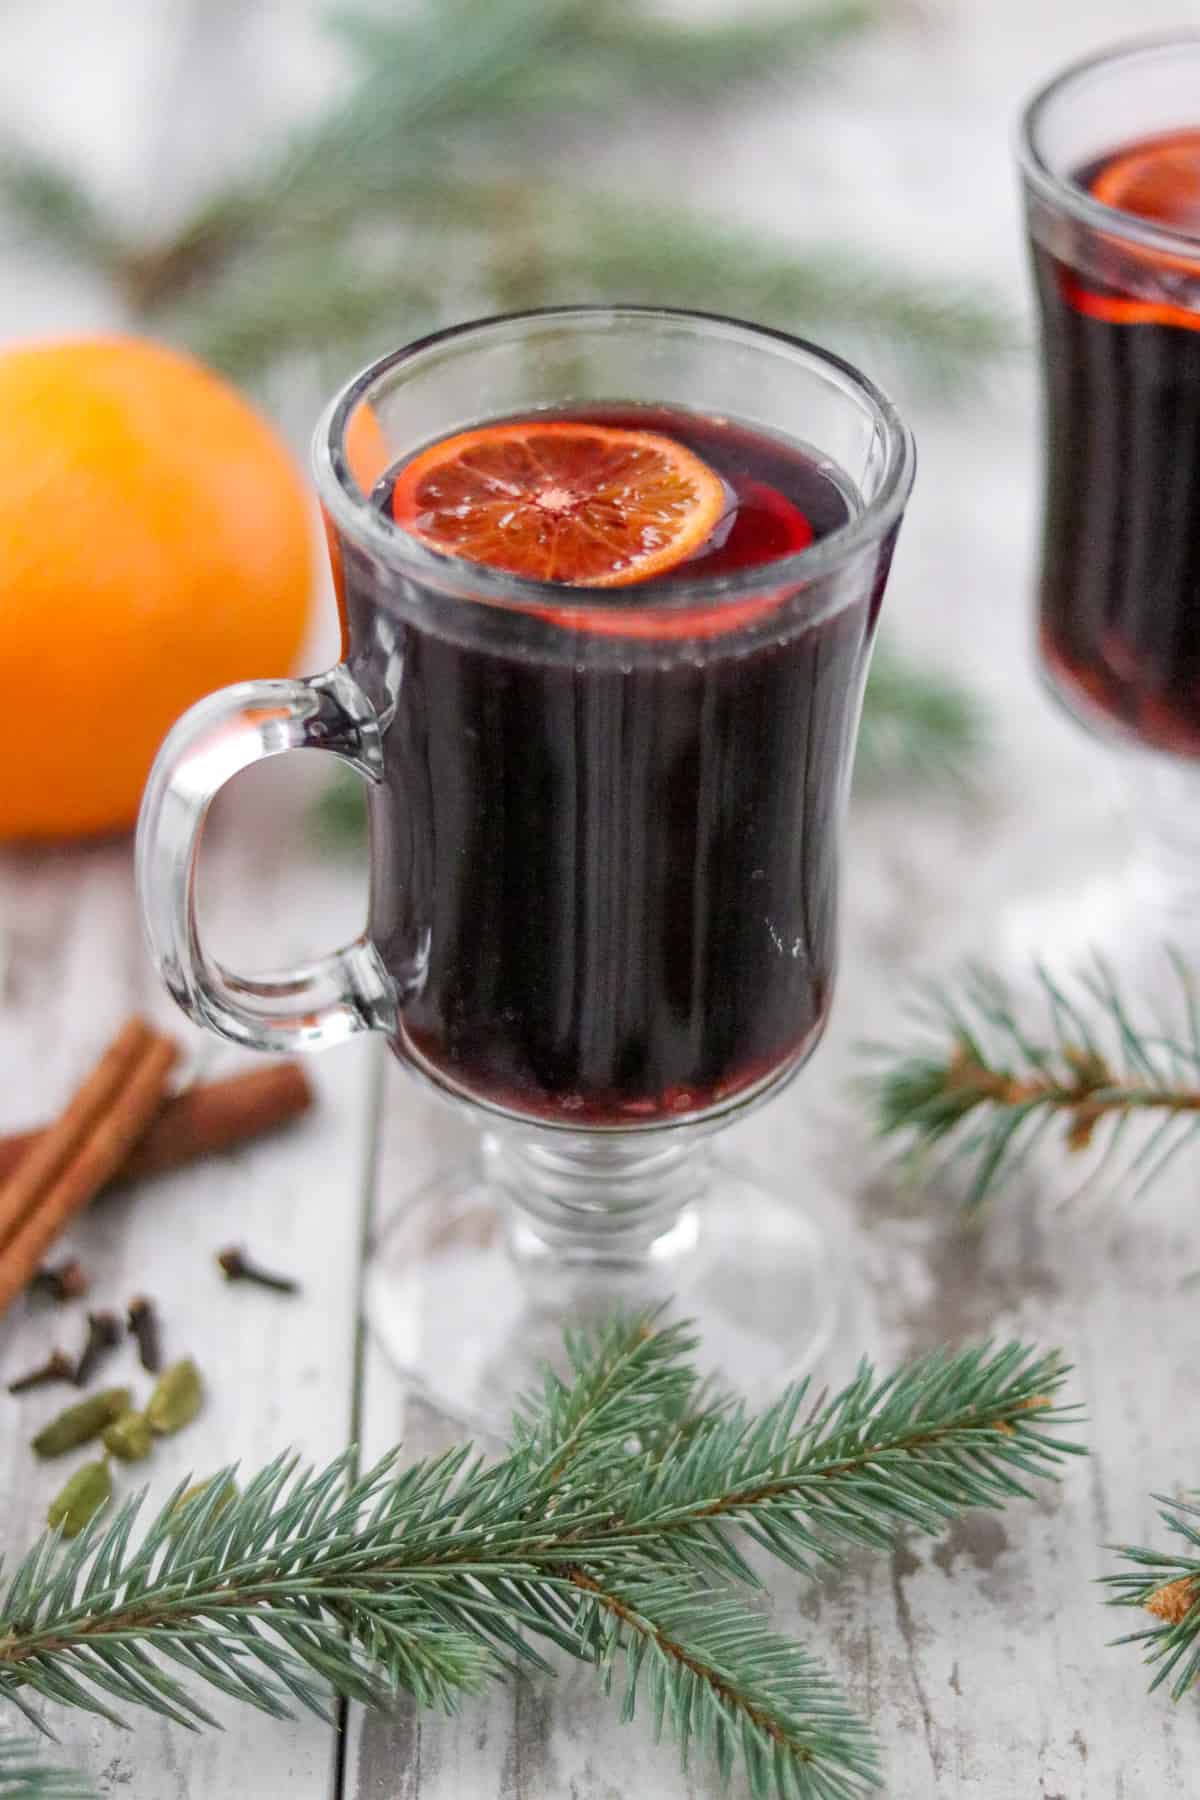 A cup of mulled wine next to evergreen branches, spices and an orange.